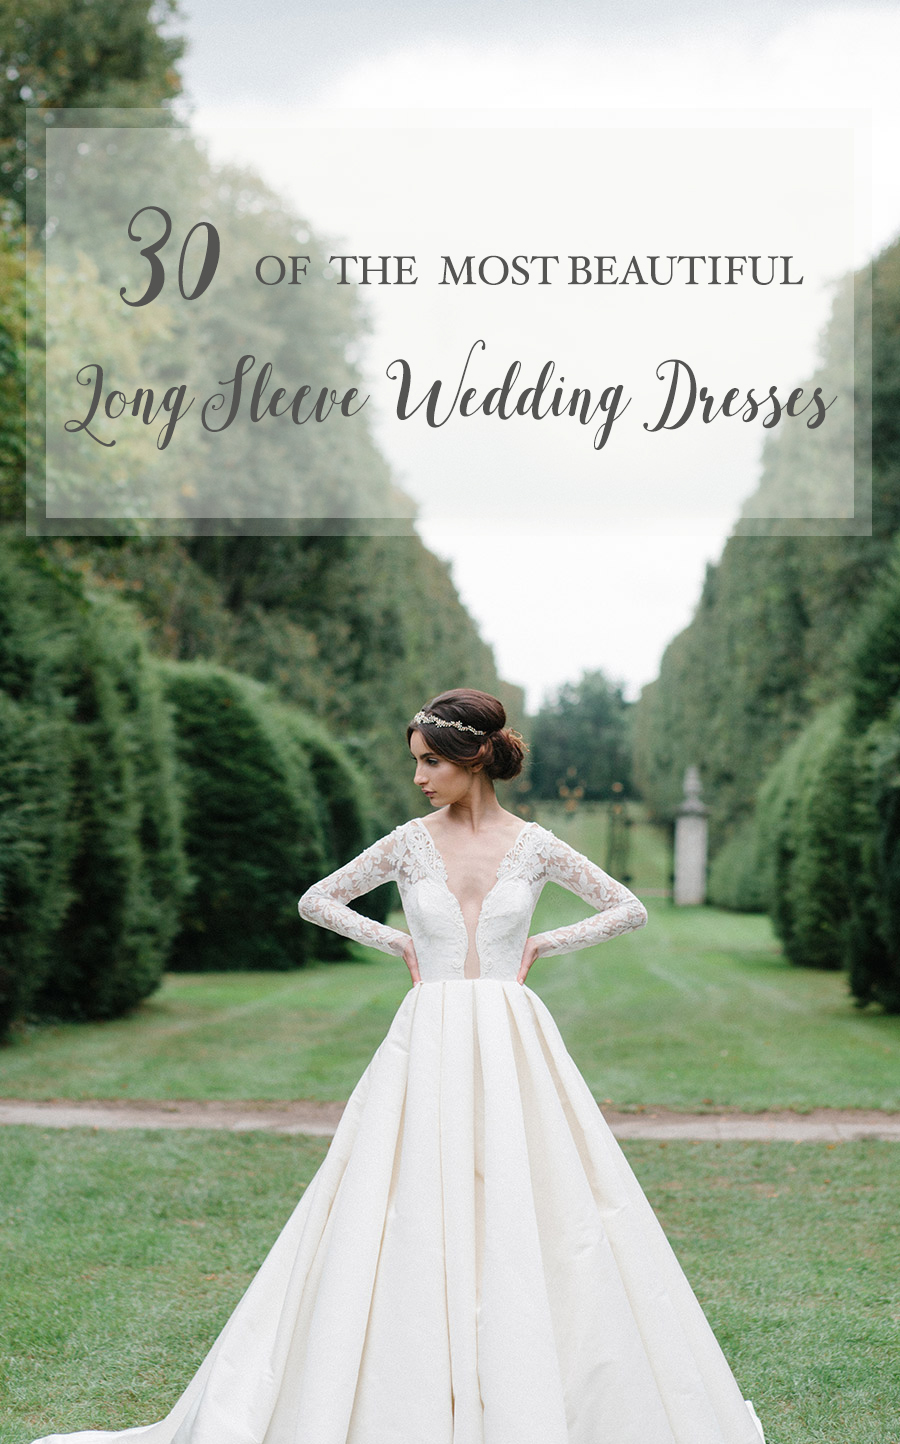 30 of the most Beautiful Long Sleeve Wedding Dresses for 2016